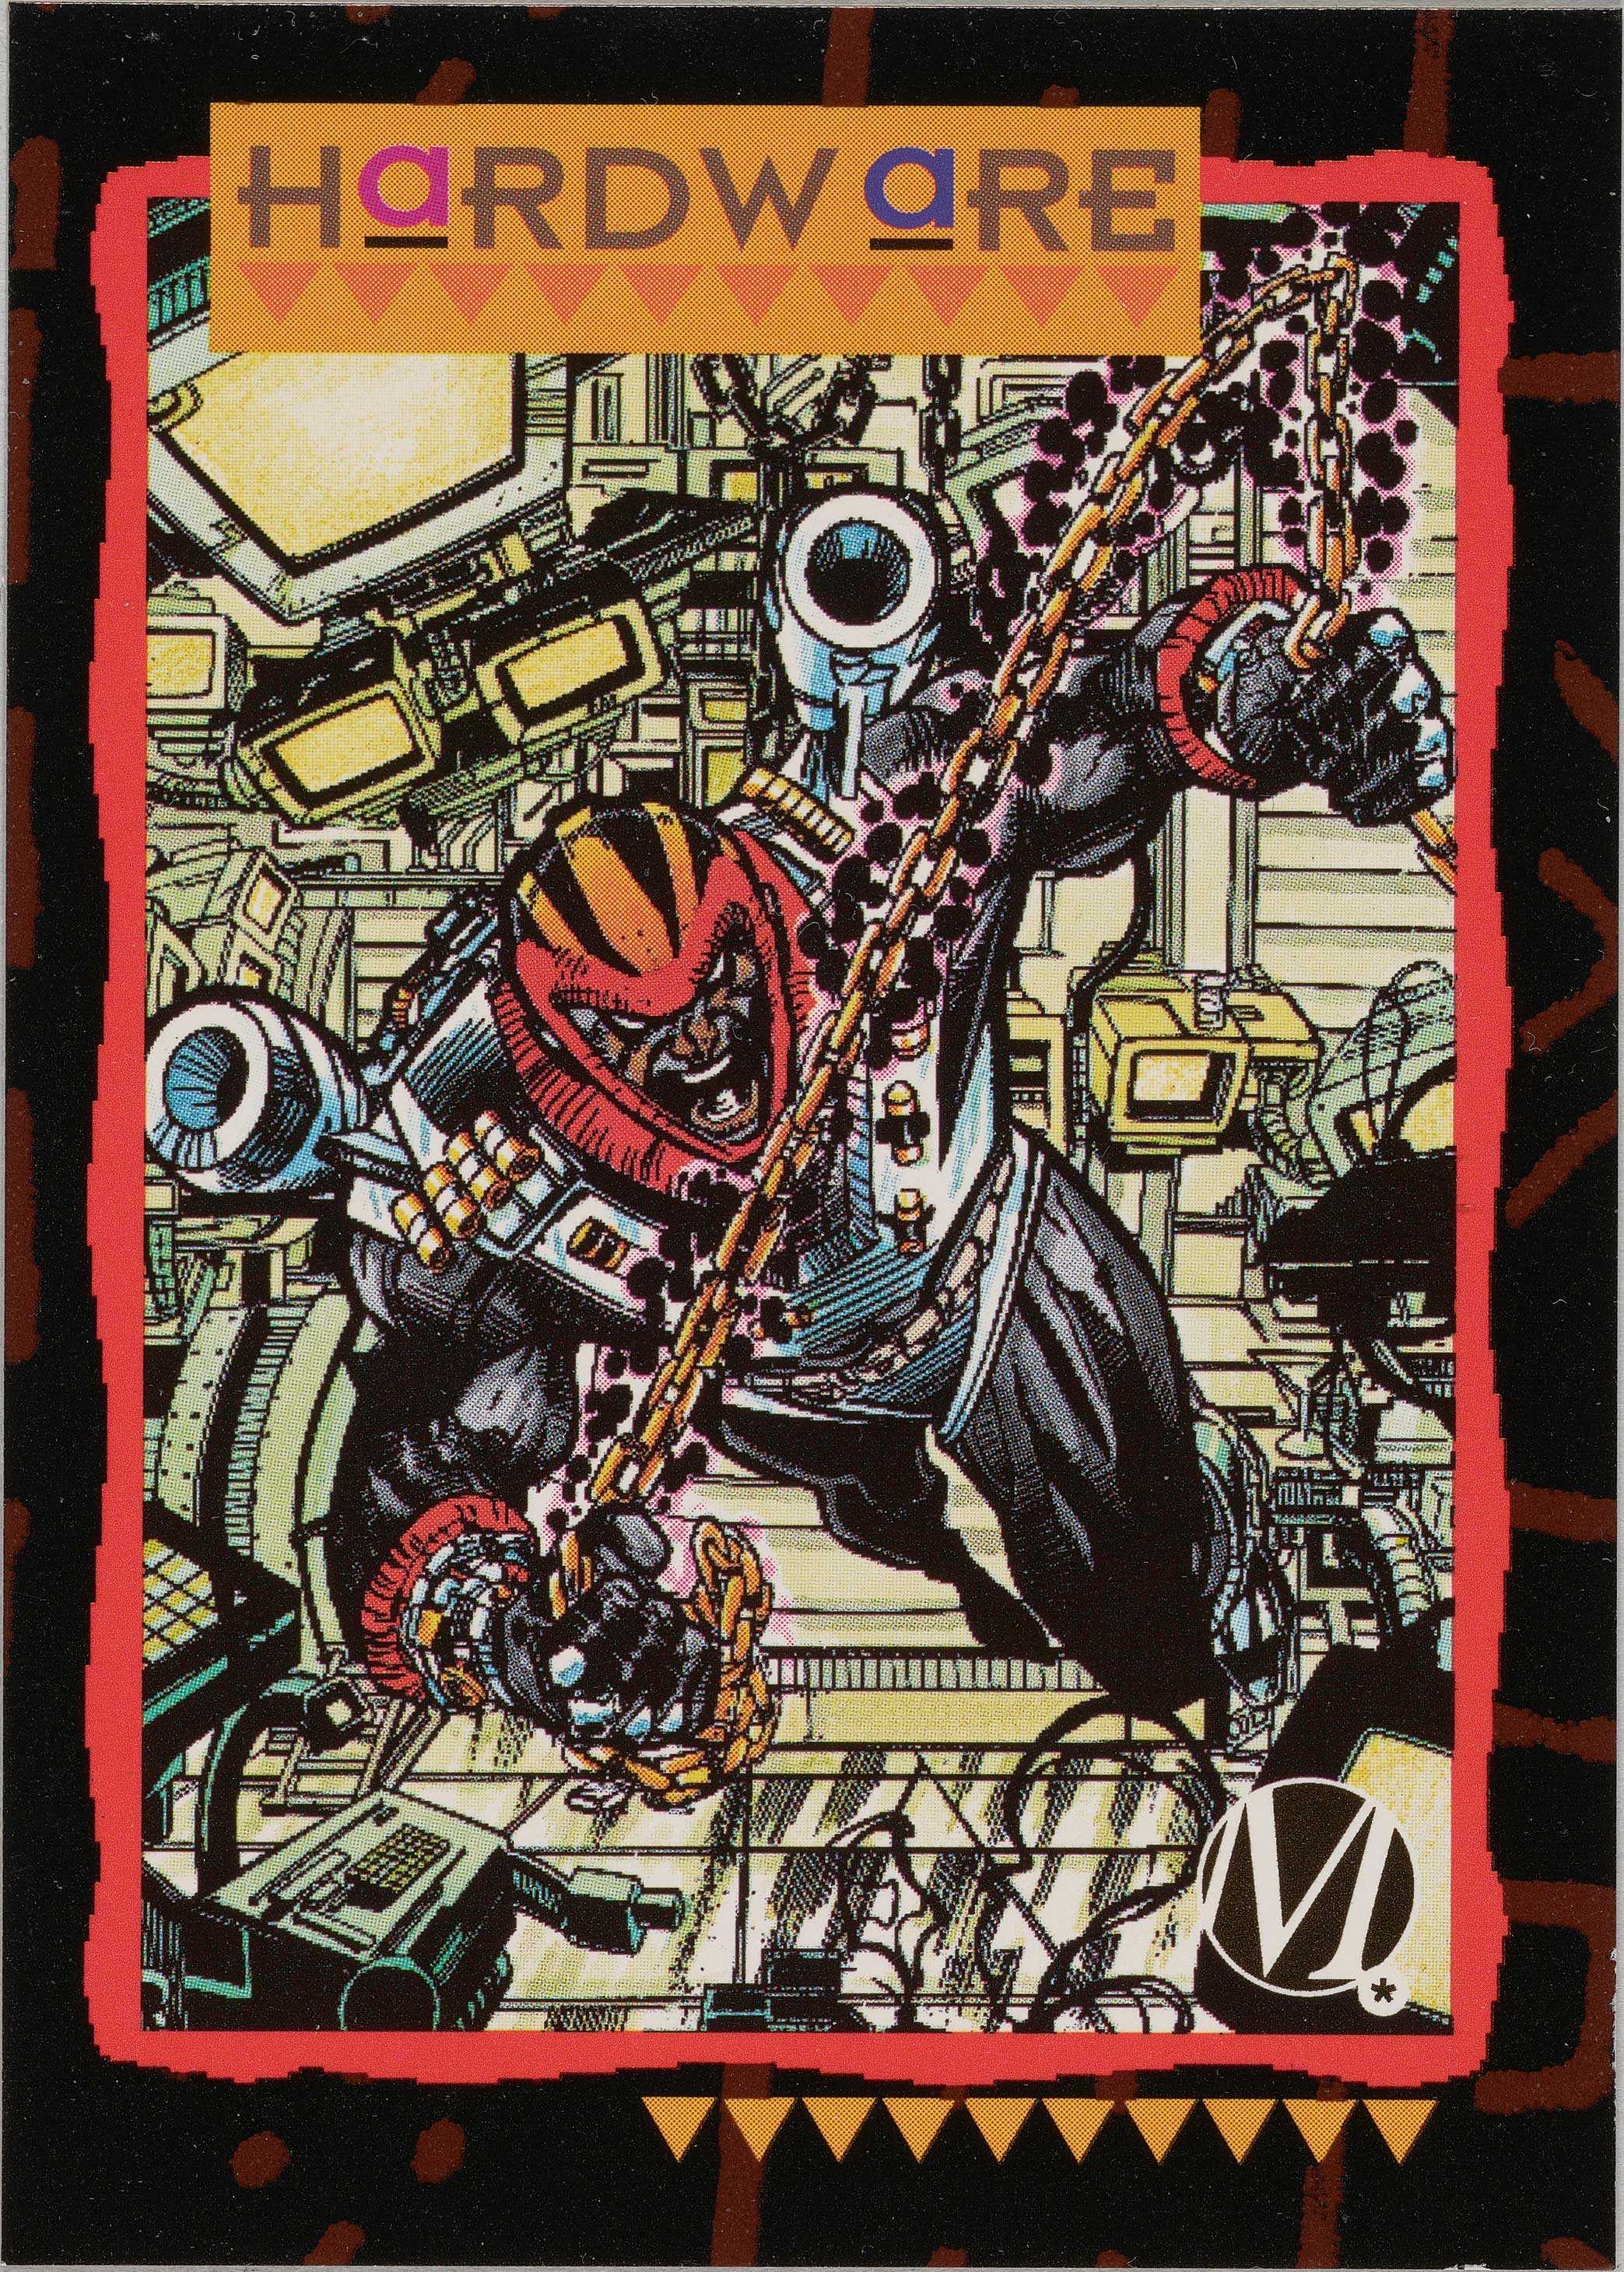 A trading card features a color image of the character Hardware in action.